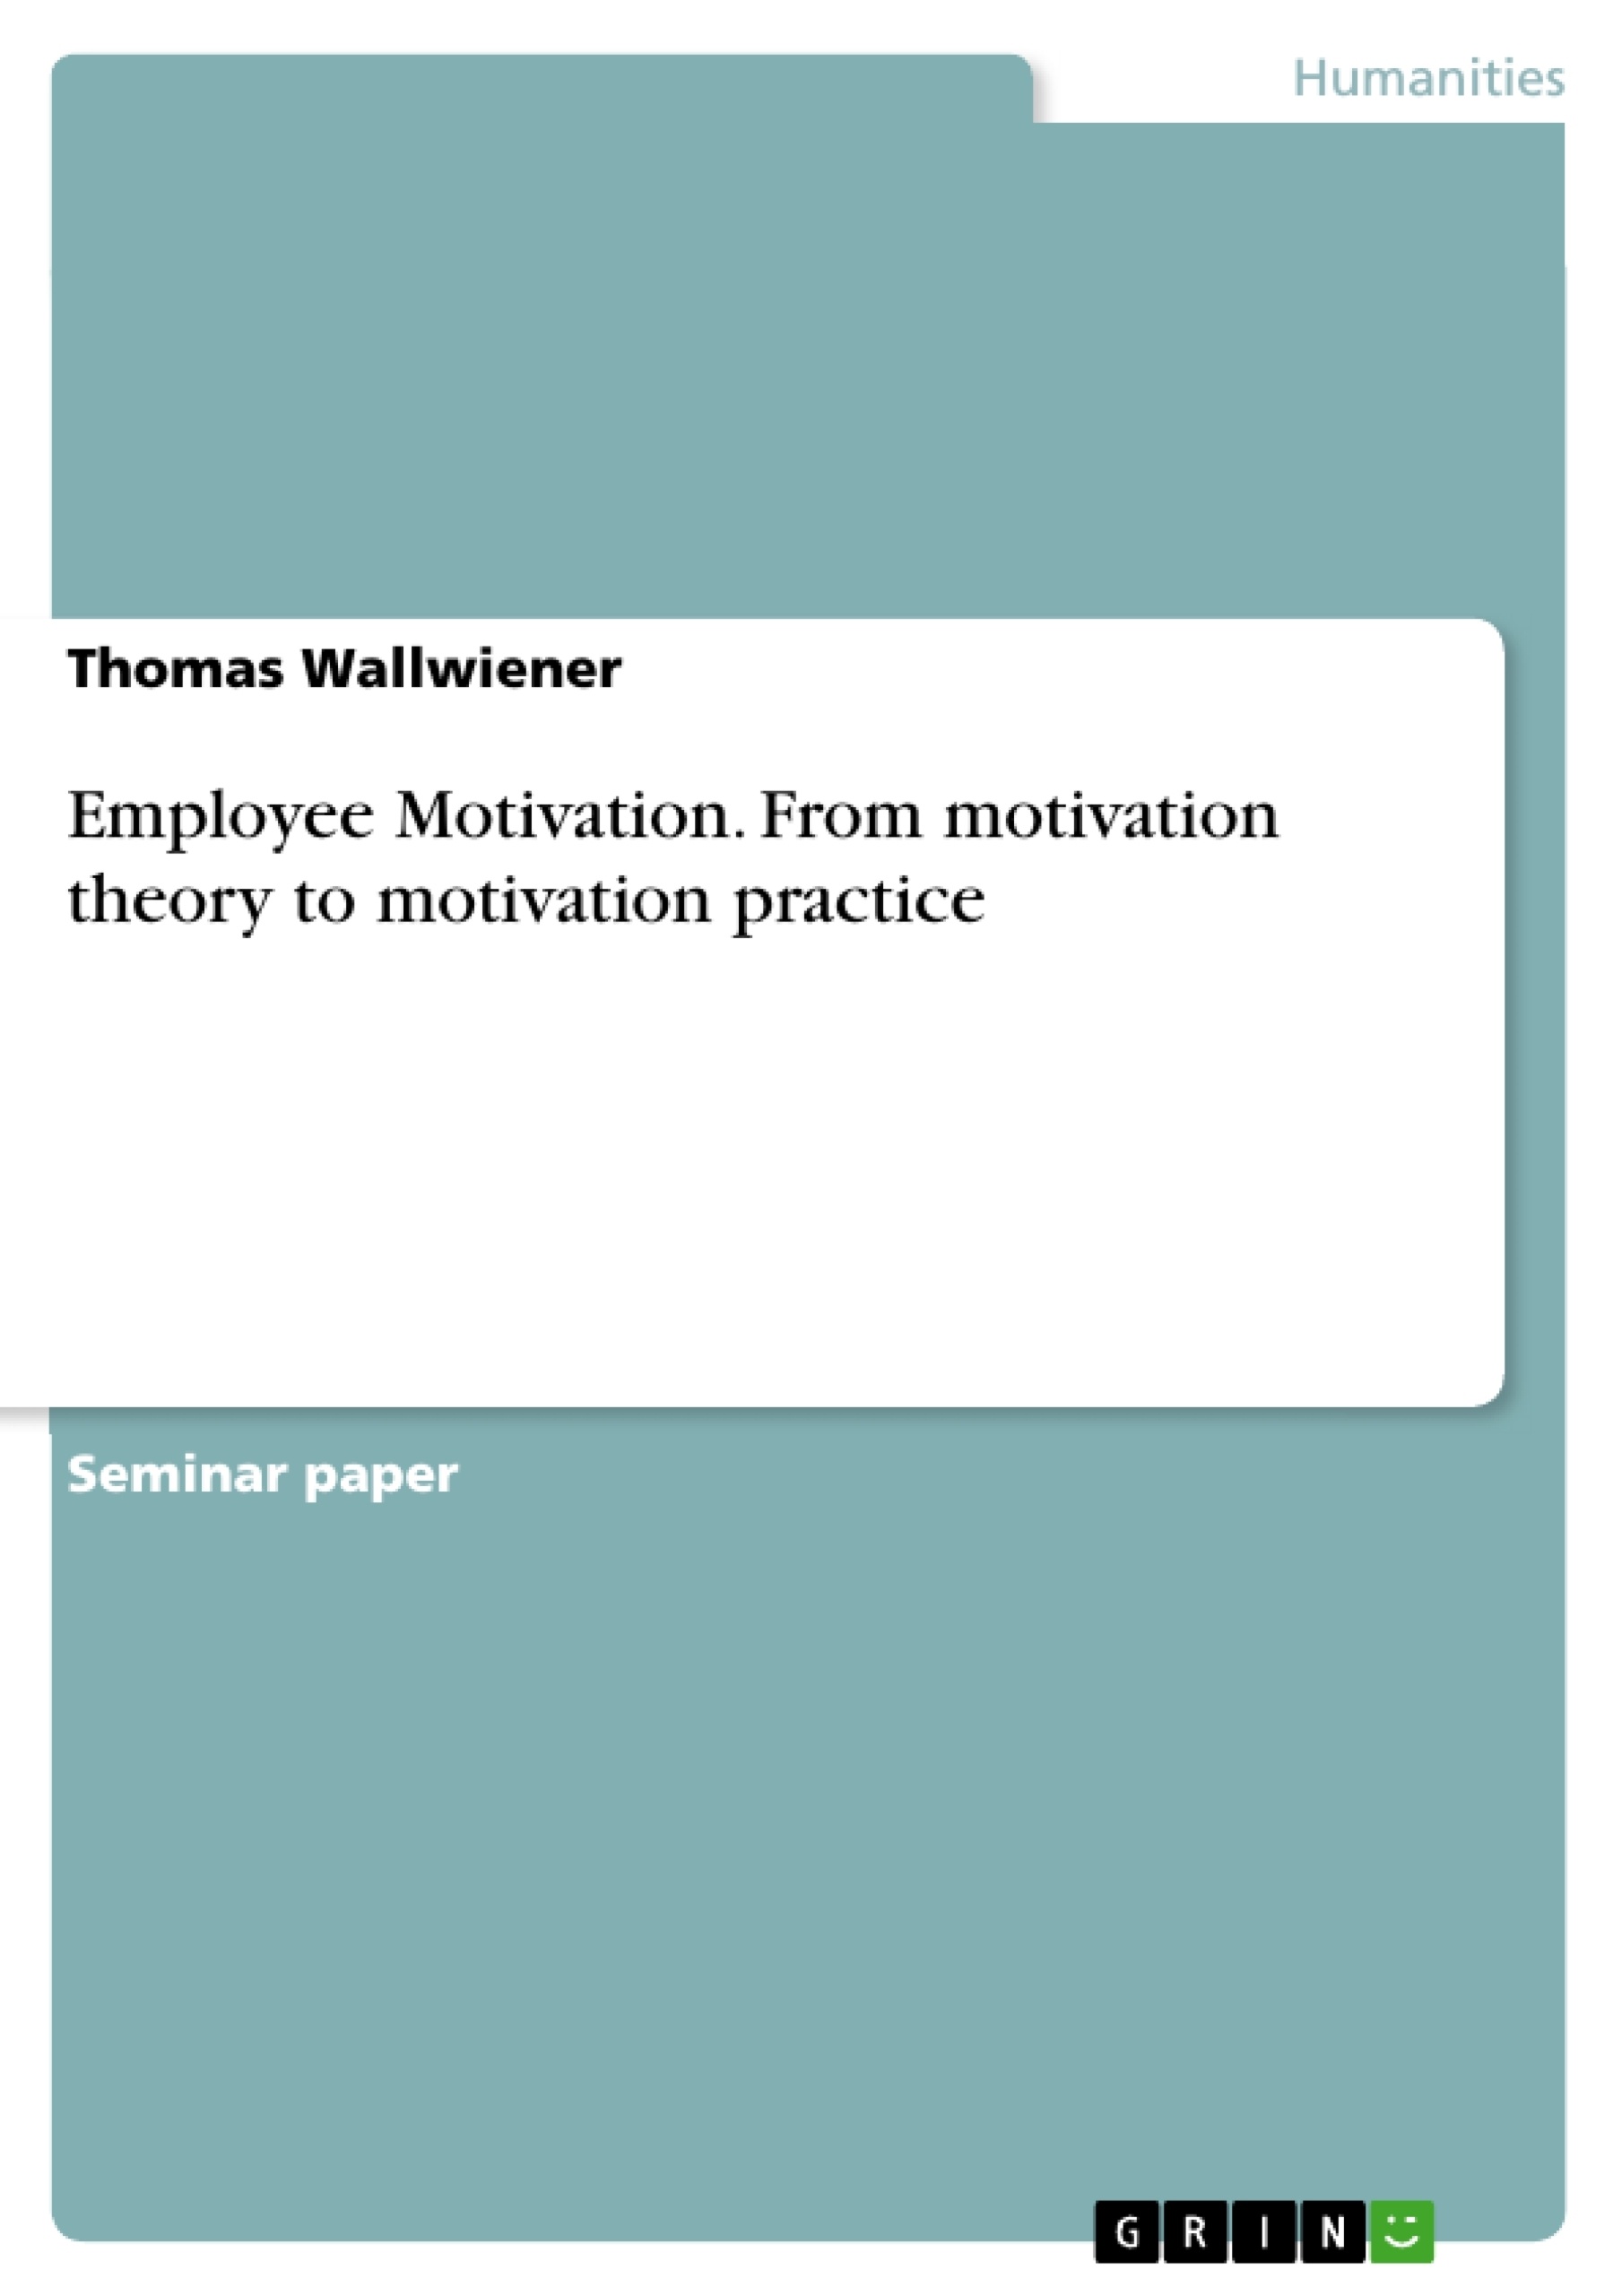 Title: Employee Motivation. From motivation theory to motivation practice